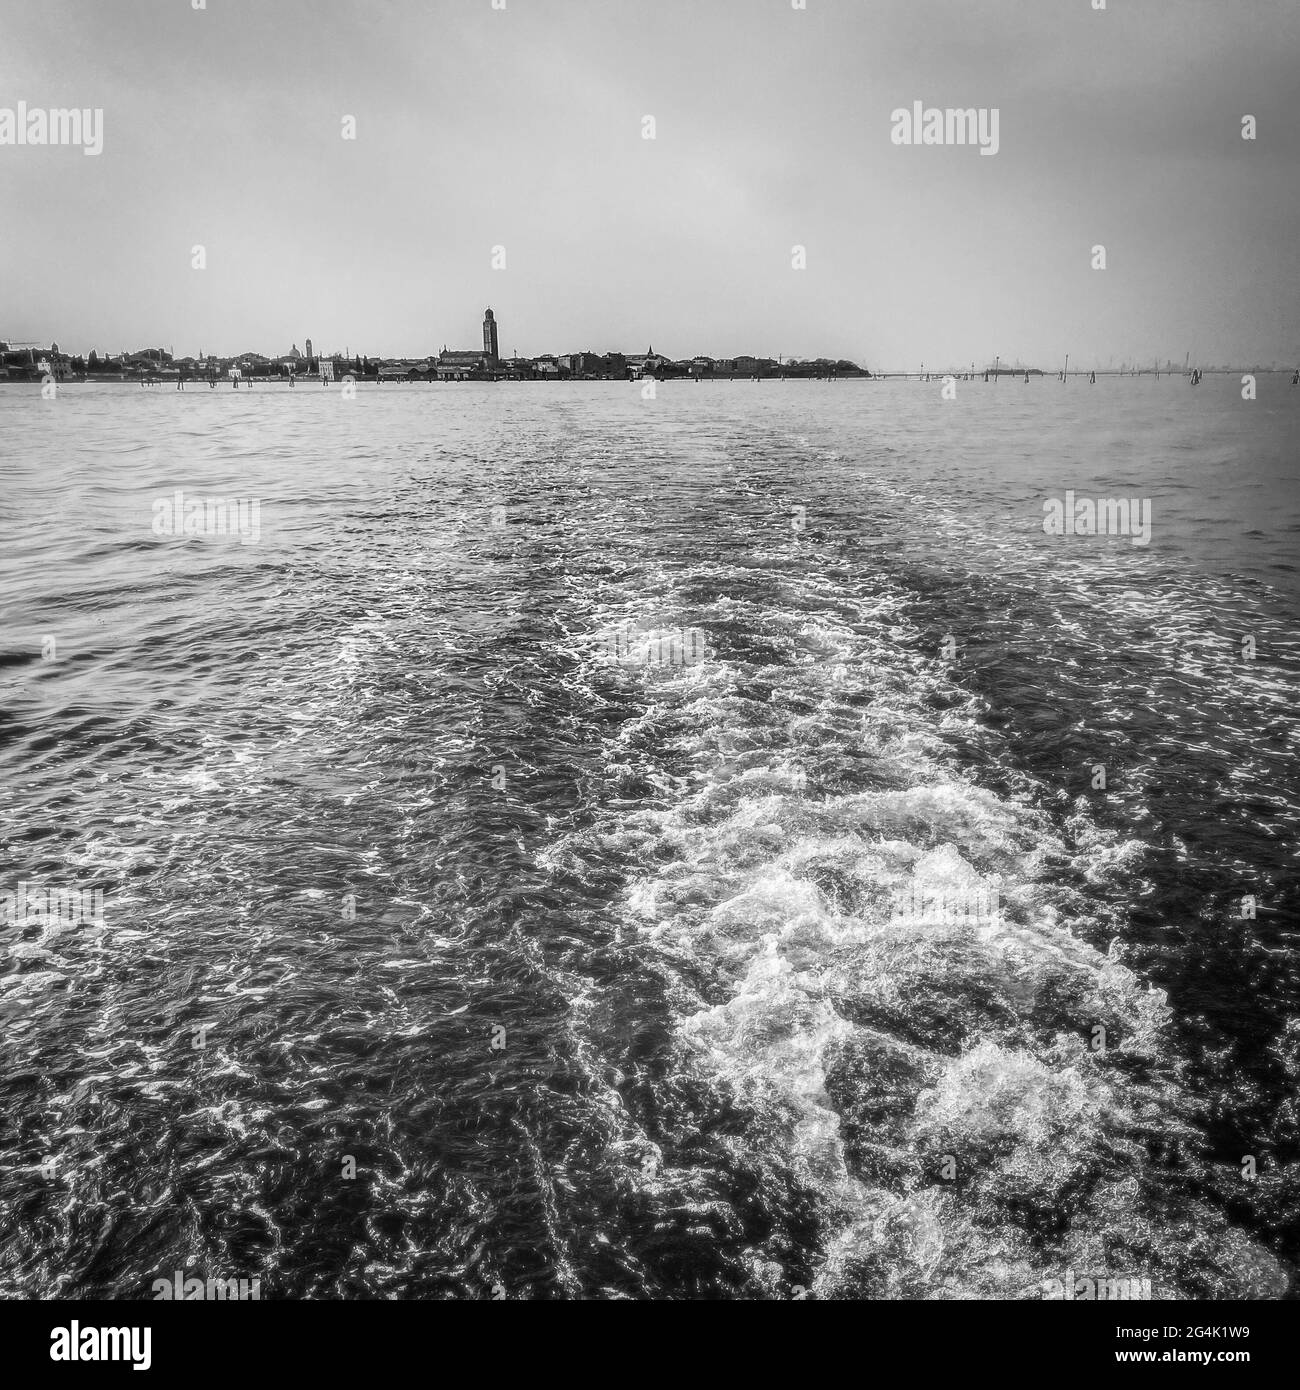 The lagoon view from a boat taxi leaving behind it Venice, Black and white photography Stock Photo